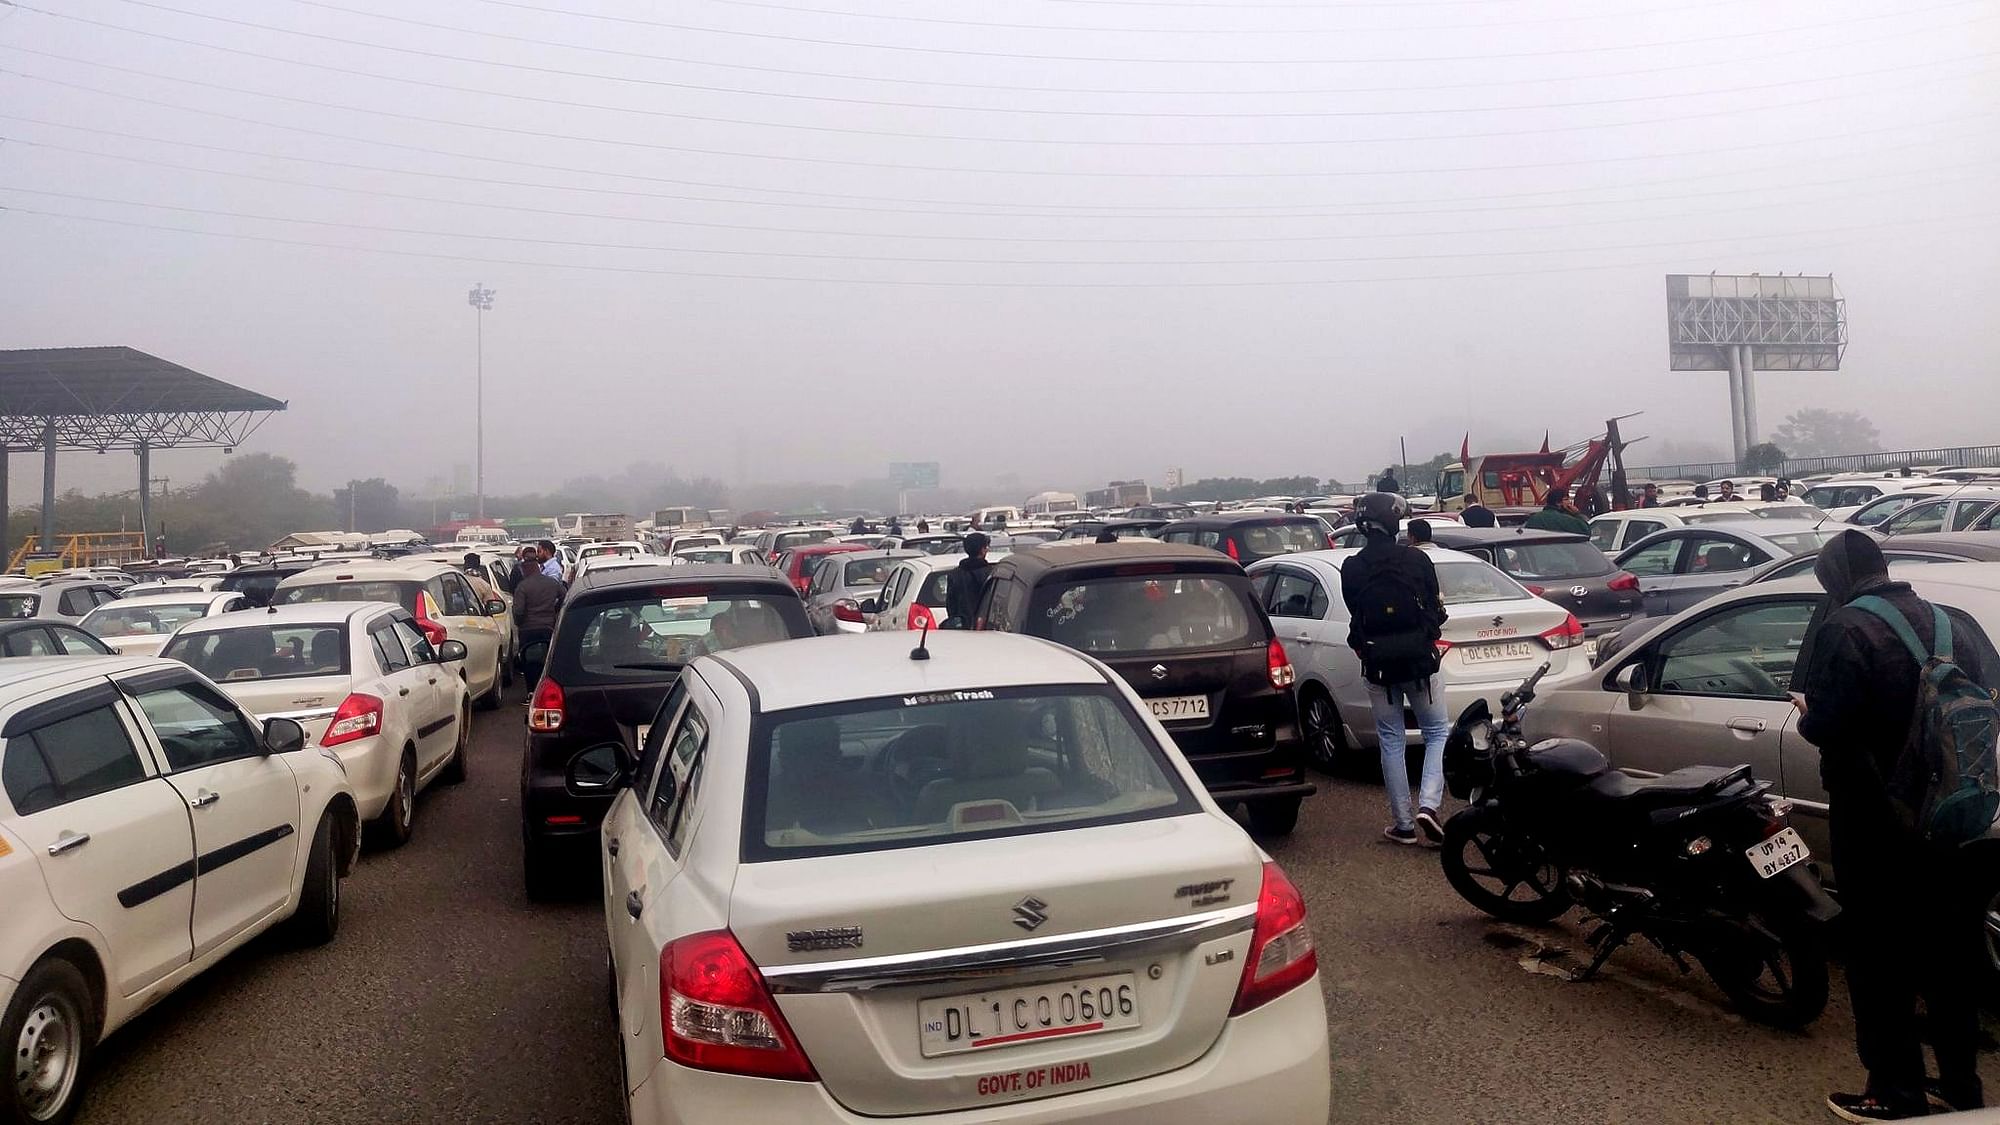 Massive jams at Delhi-Gurugram border have brought traffic to a standstill. Meanwhile, many metro stations have been shut amid protests against CAA.